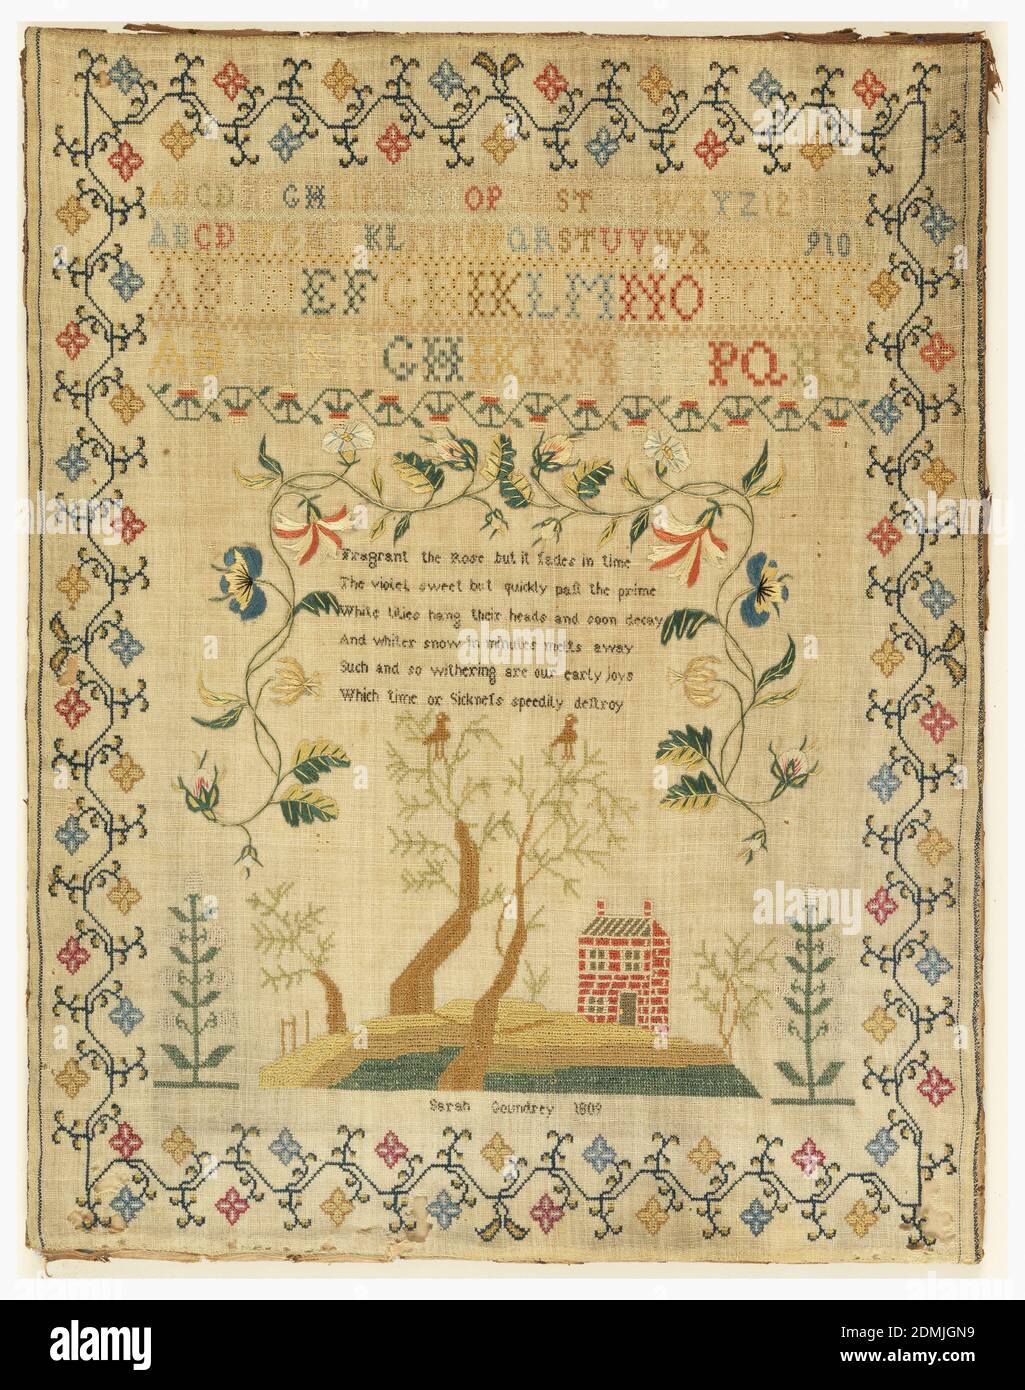 Sampler, Sarah Goundrey, English, Medium: silk embroidery on wool foundation Technique: embroidered in cross, satin, stem, eyelet, and four sided stitches on plain weave foundation, Within a curving floral border, four alphabets and a text: 'Fragrant the rose but it fades in time/ The violet sweet but quick past the prime/ While lillies hand their heads and soon decay/ And whiter snow in minutes melts away/ Such and so withering are our earthly joys/ Which Time or Sickness speedily destroy' then a scene of a house in a landscape and a signature., England, 1809, embroidery & stitching, Sampler Stock Photo